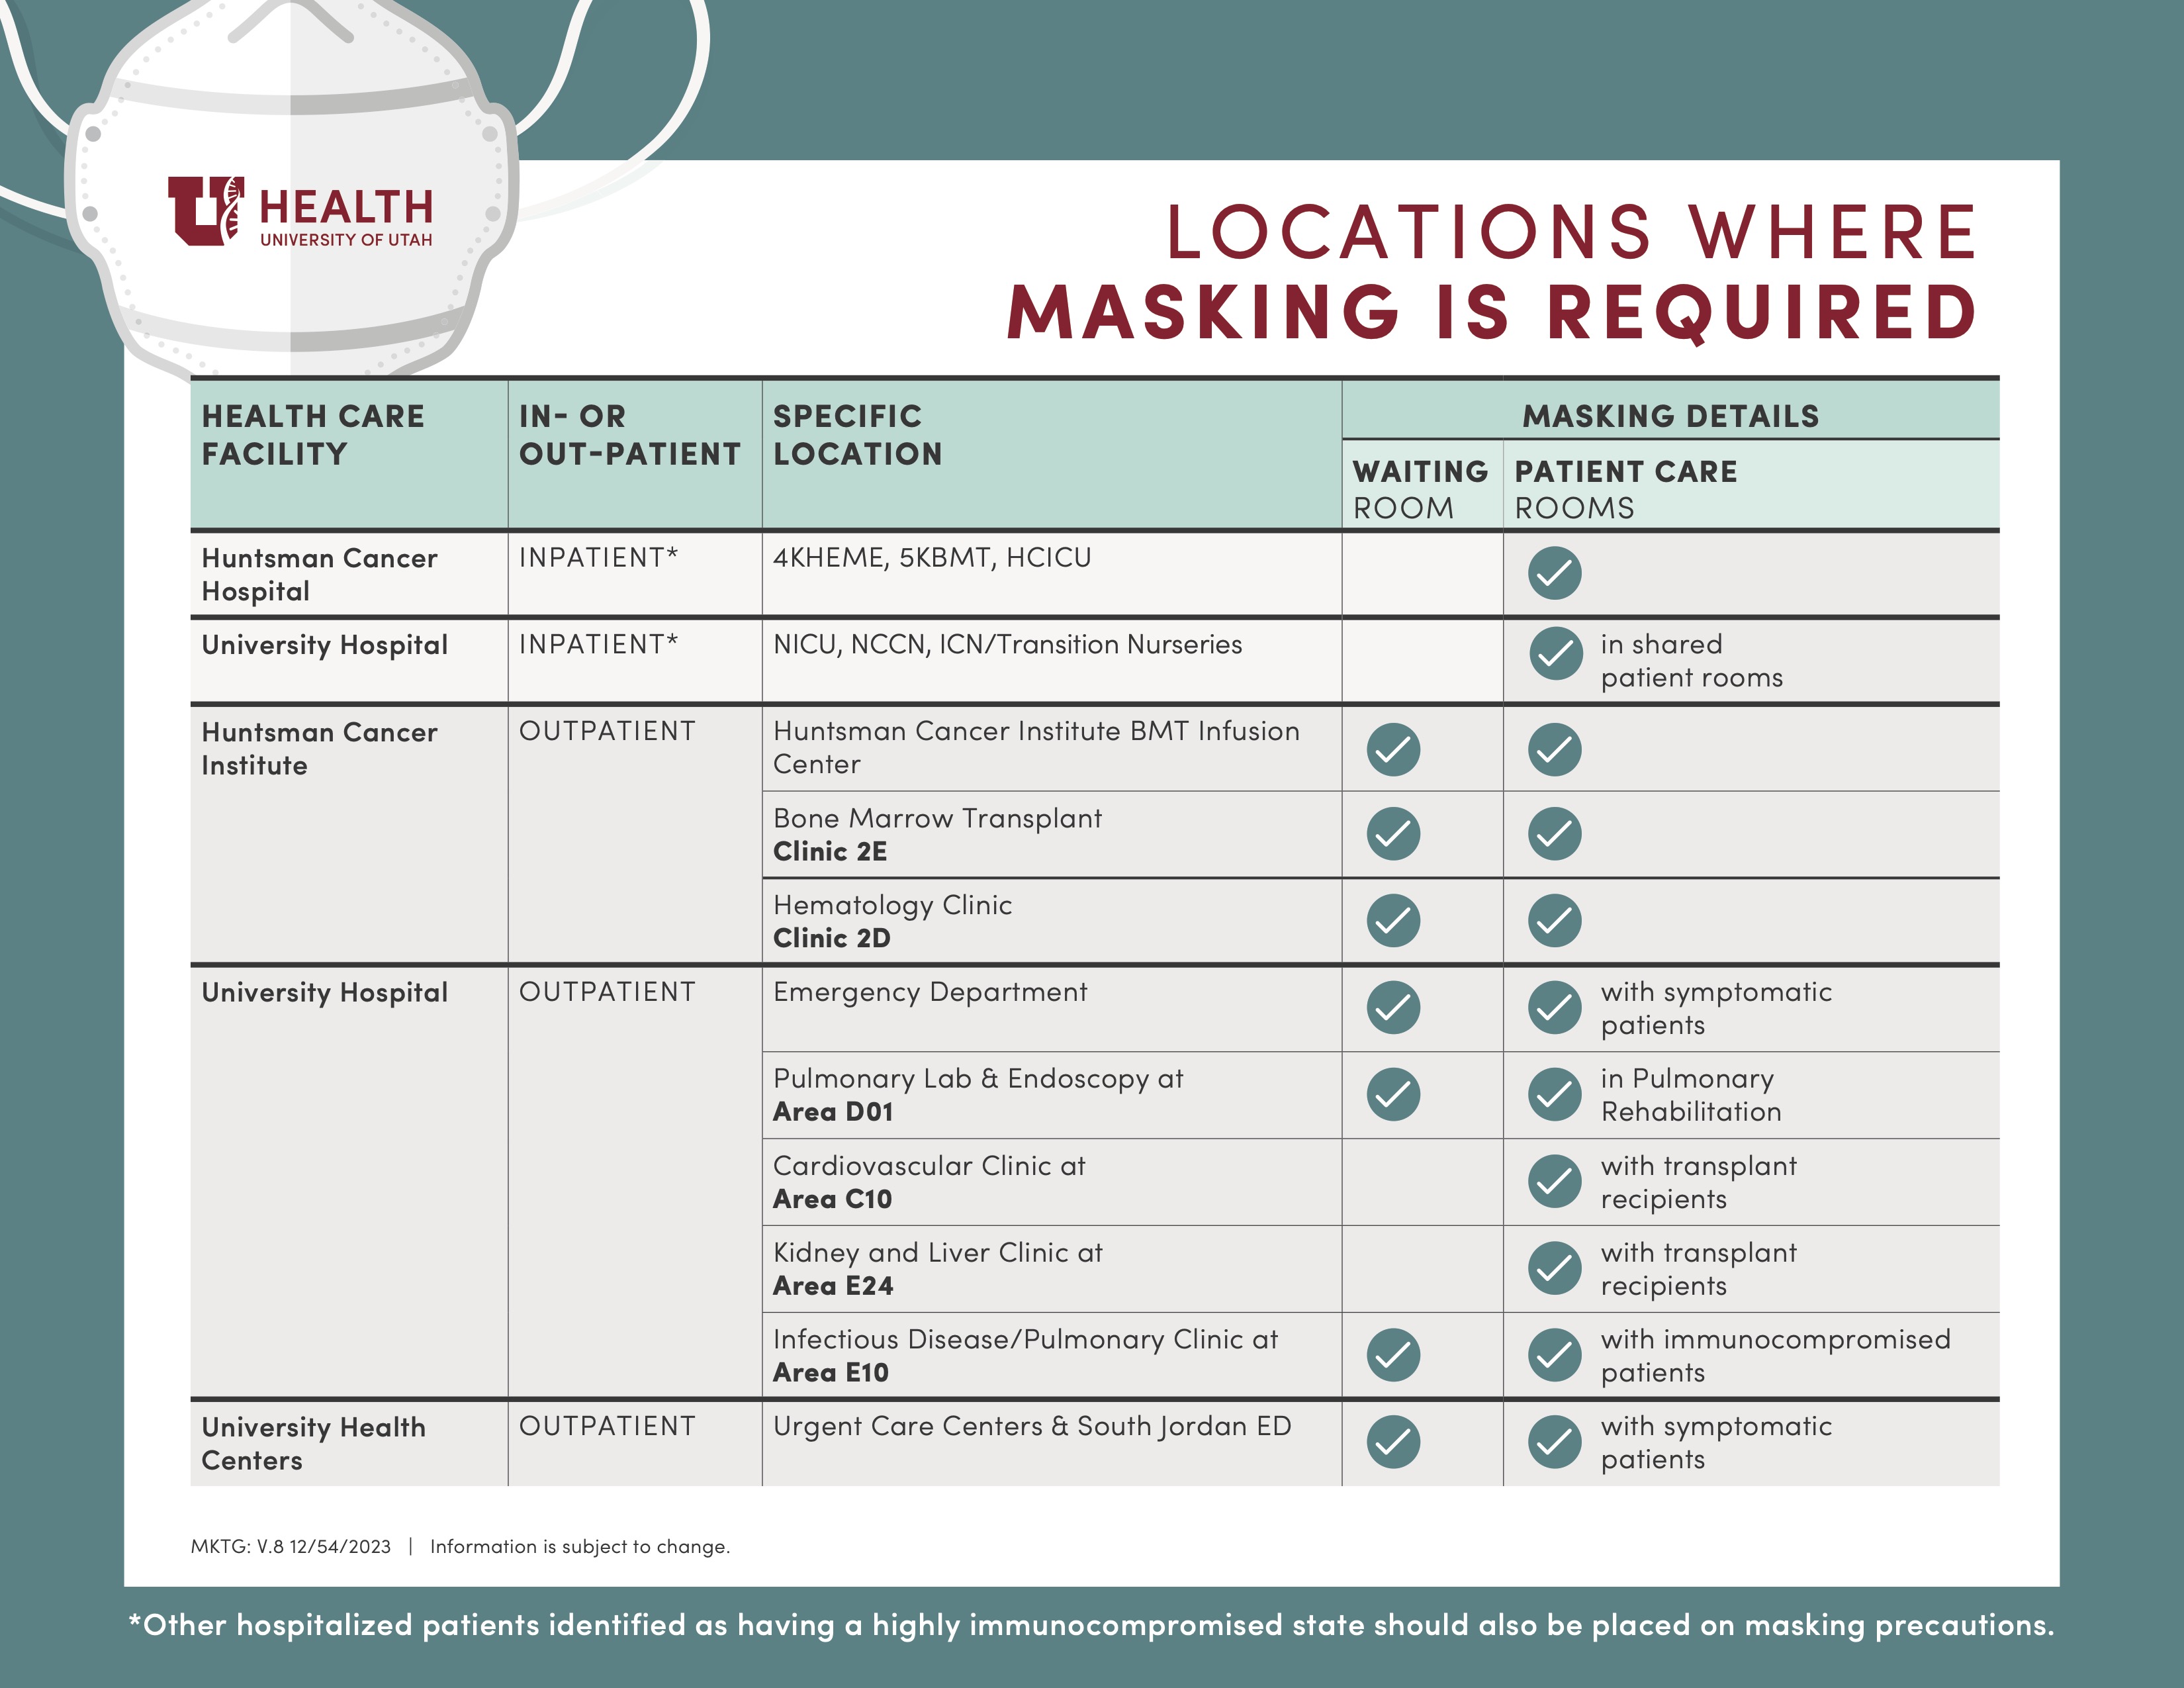 Picture of table showing U of U Health locations where masking is still required